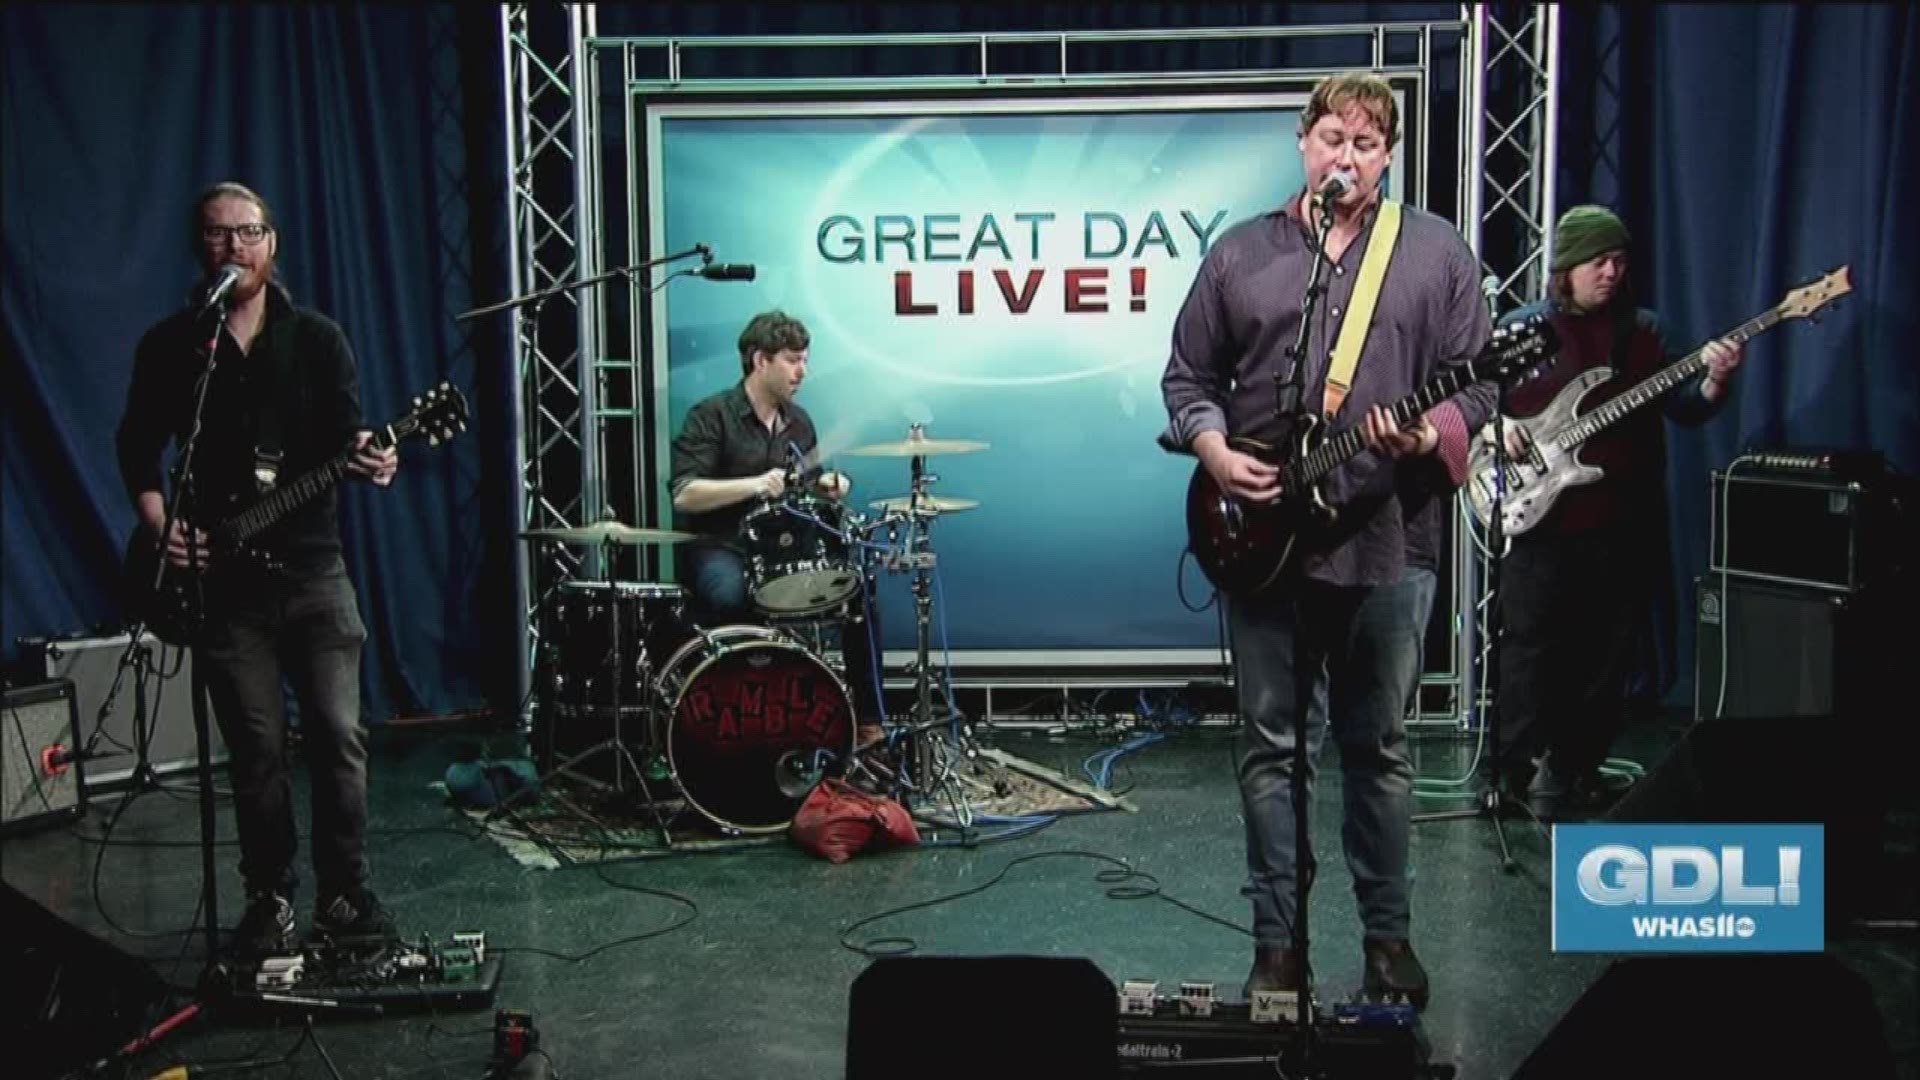 The band Ramble stopped by to perform on Great Day Live.